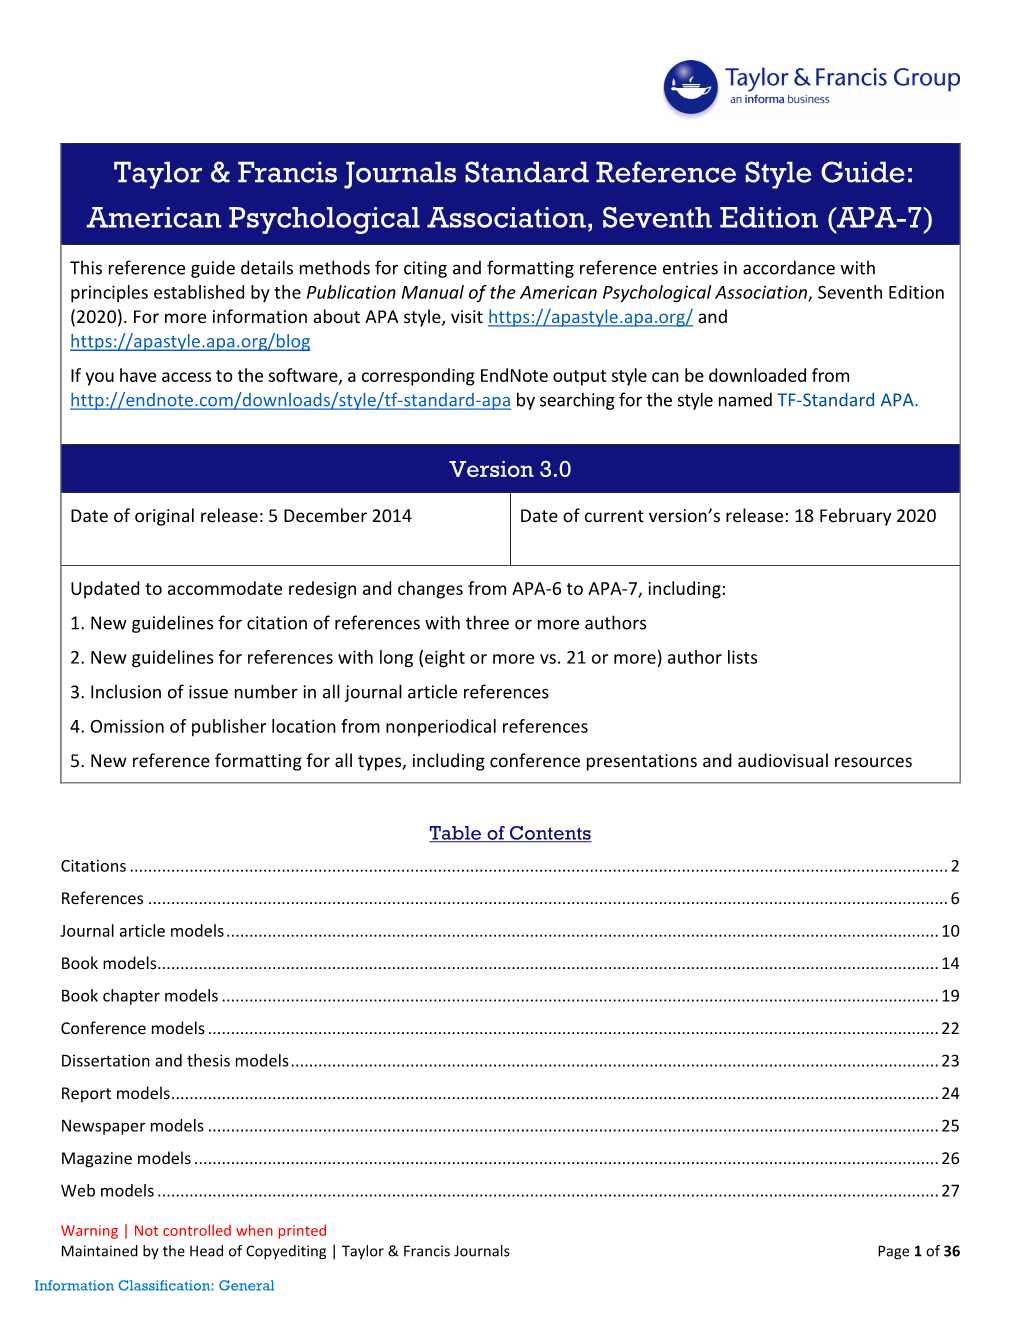 Taylor & Francis Journals Standard Reference Style Guide